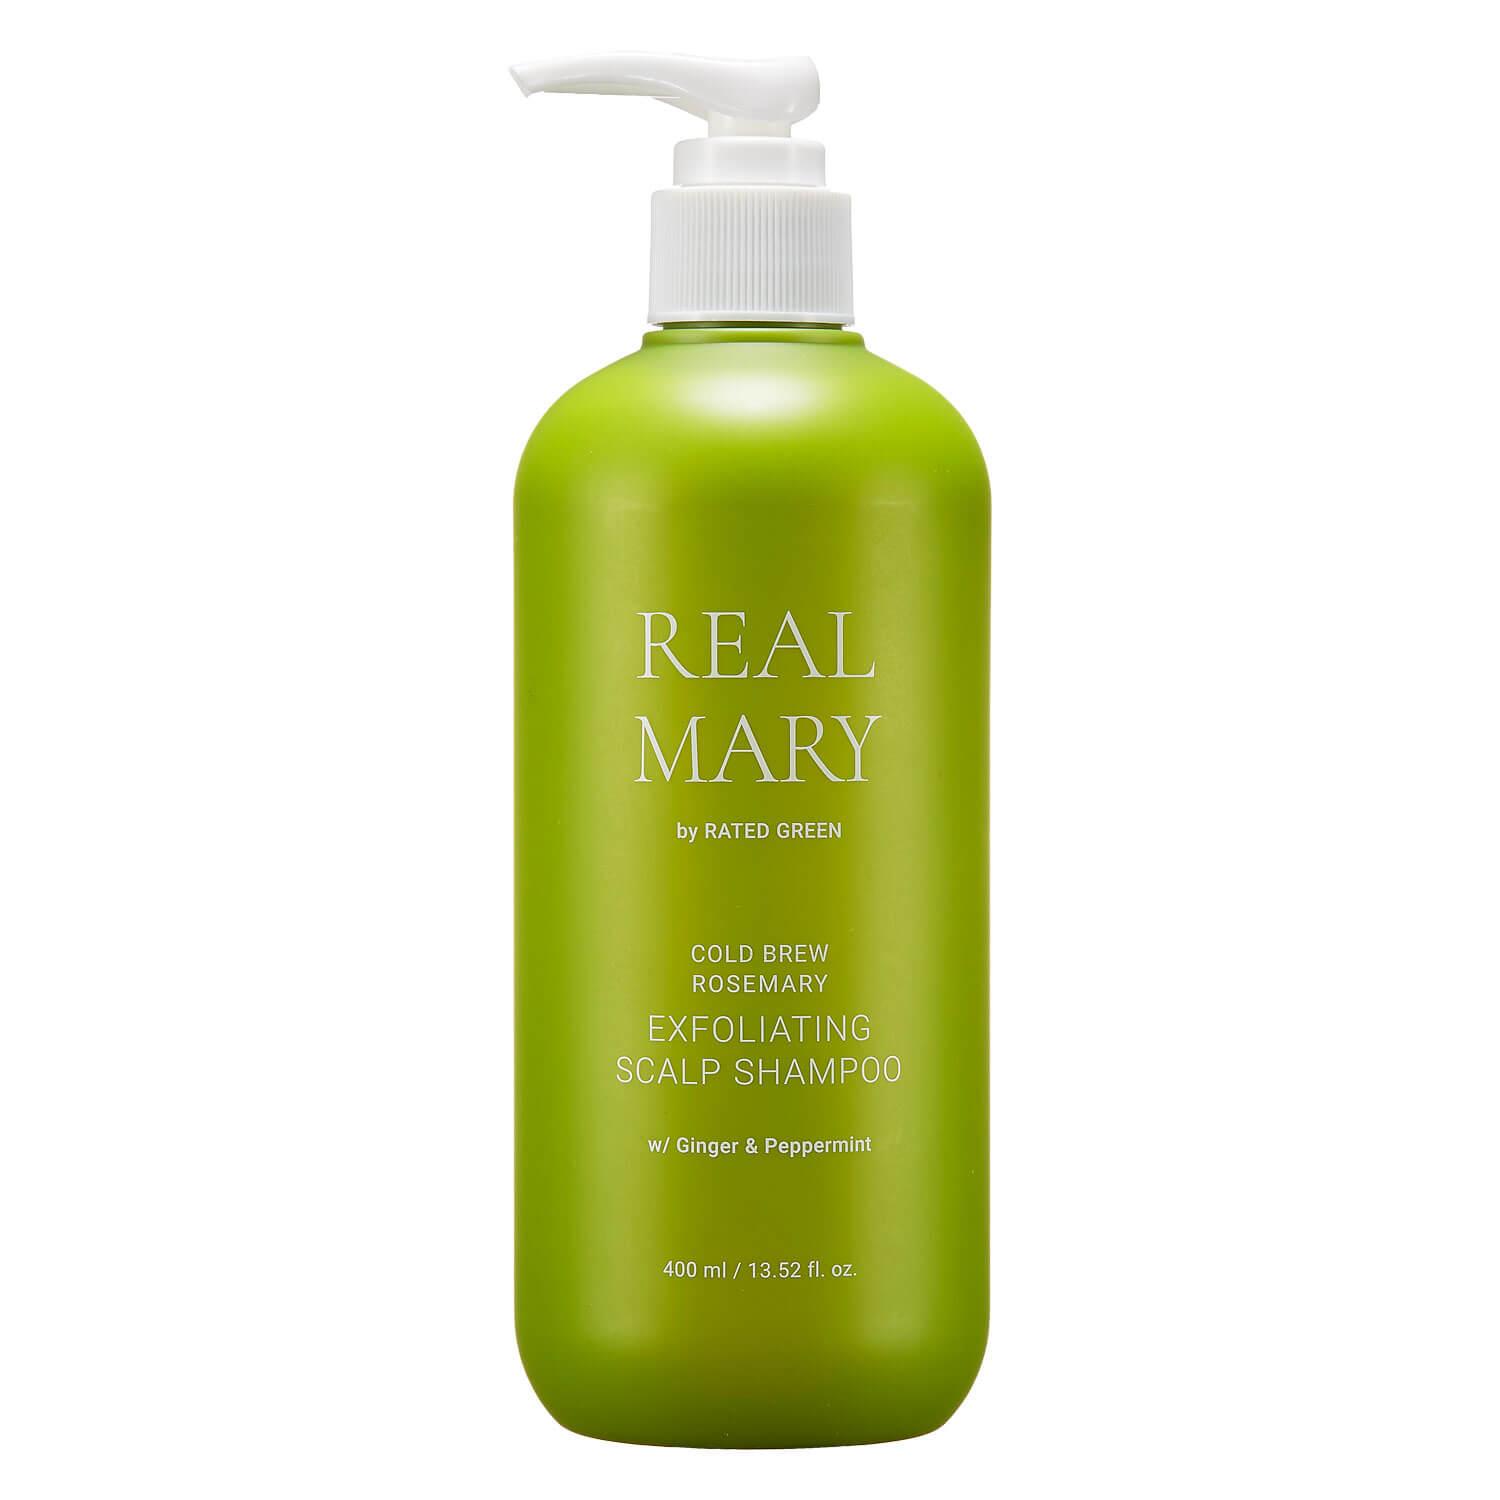 RATED GREEN - Real Mary Exfoliating Scalp Shampoo